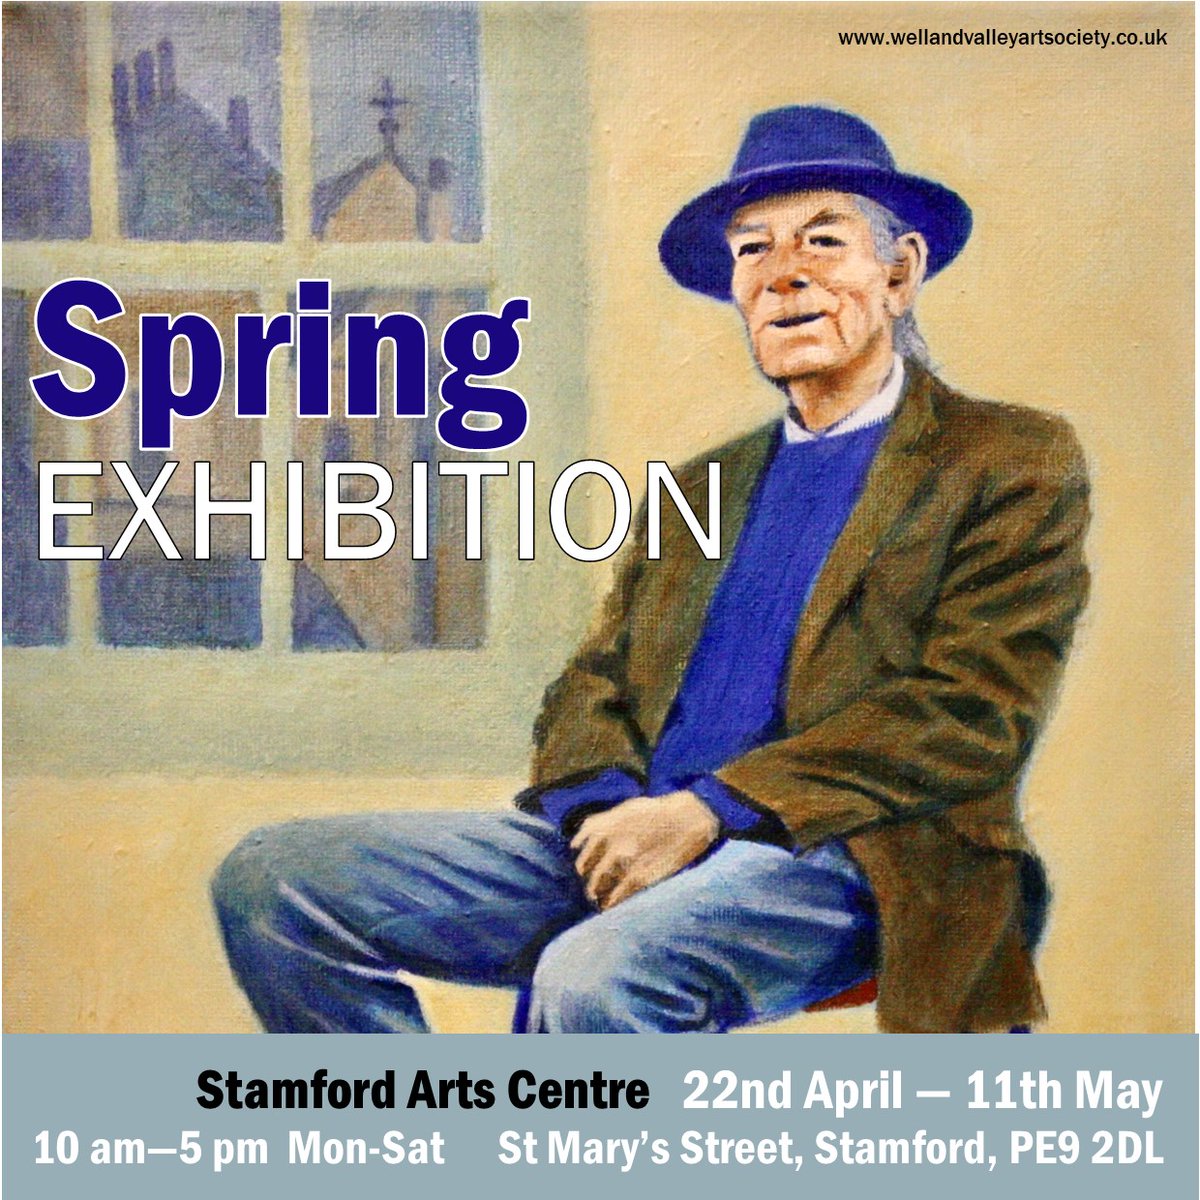 Our spring exhibition opens today (Mon 22 April) at @stamfordarts Come out of the rain and see a wonderful selection of sculptures, drawings and paintings ranging from more 'traditional' to 'abstract' - and a selection of unframed work and prints in the browers. #stamforduk